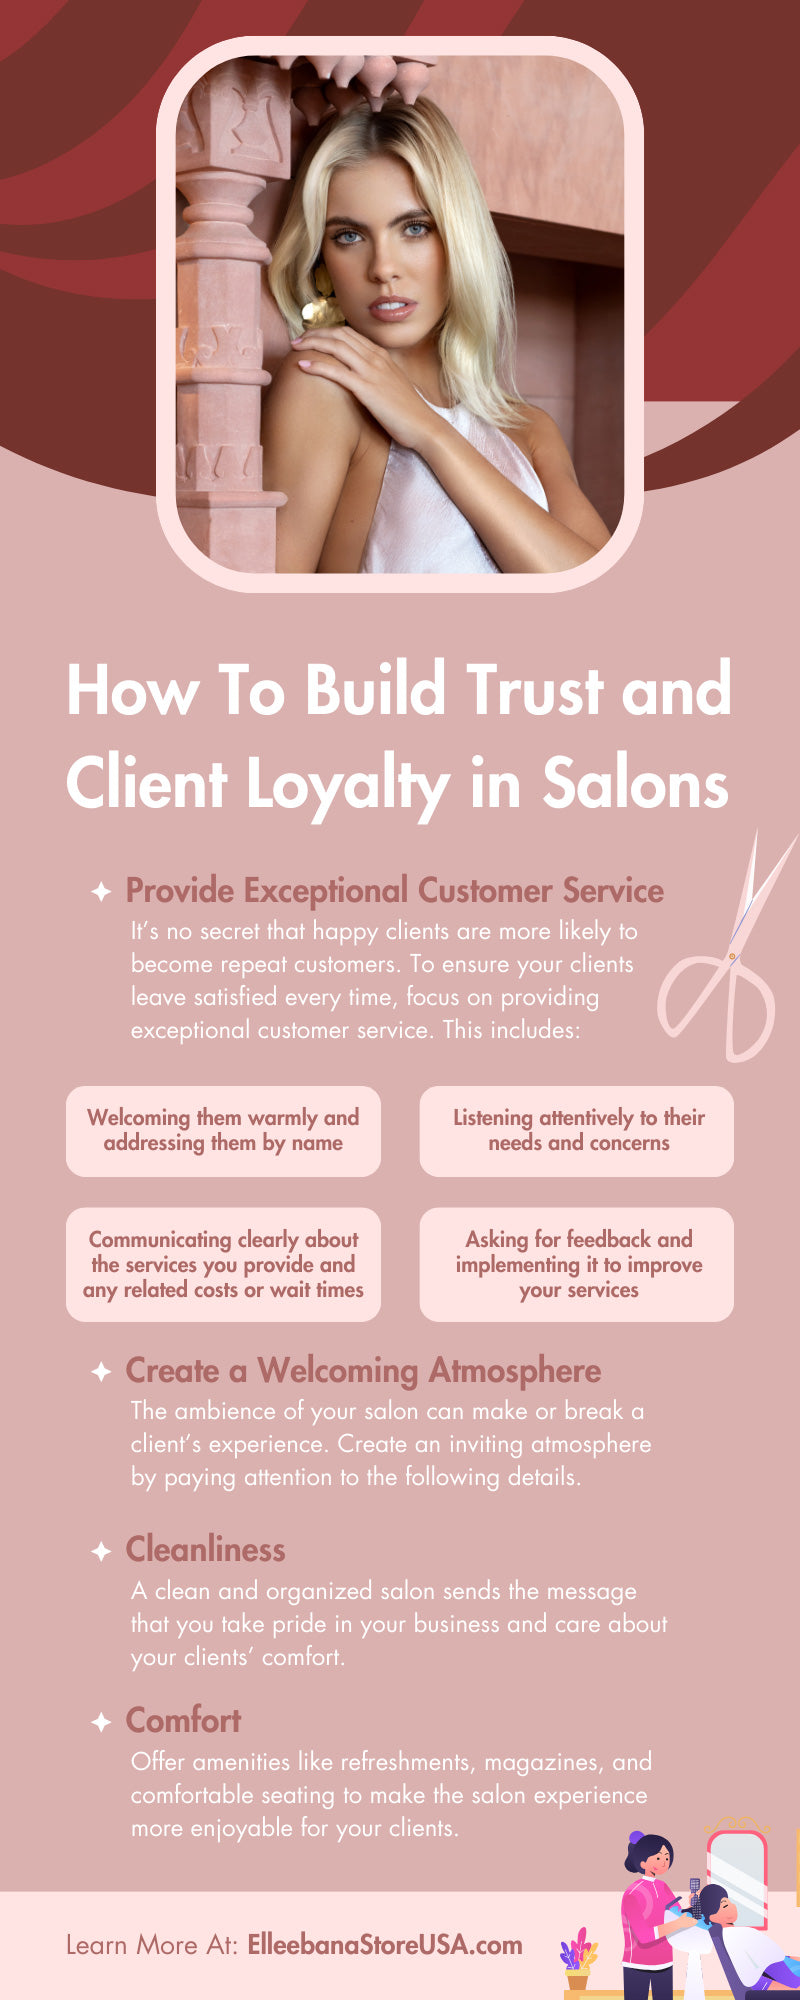 How To Build Trust and Client Loyalty in Salons